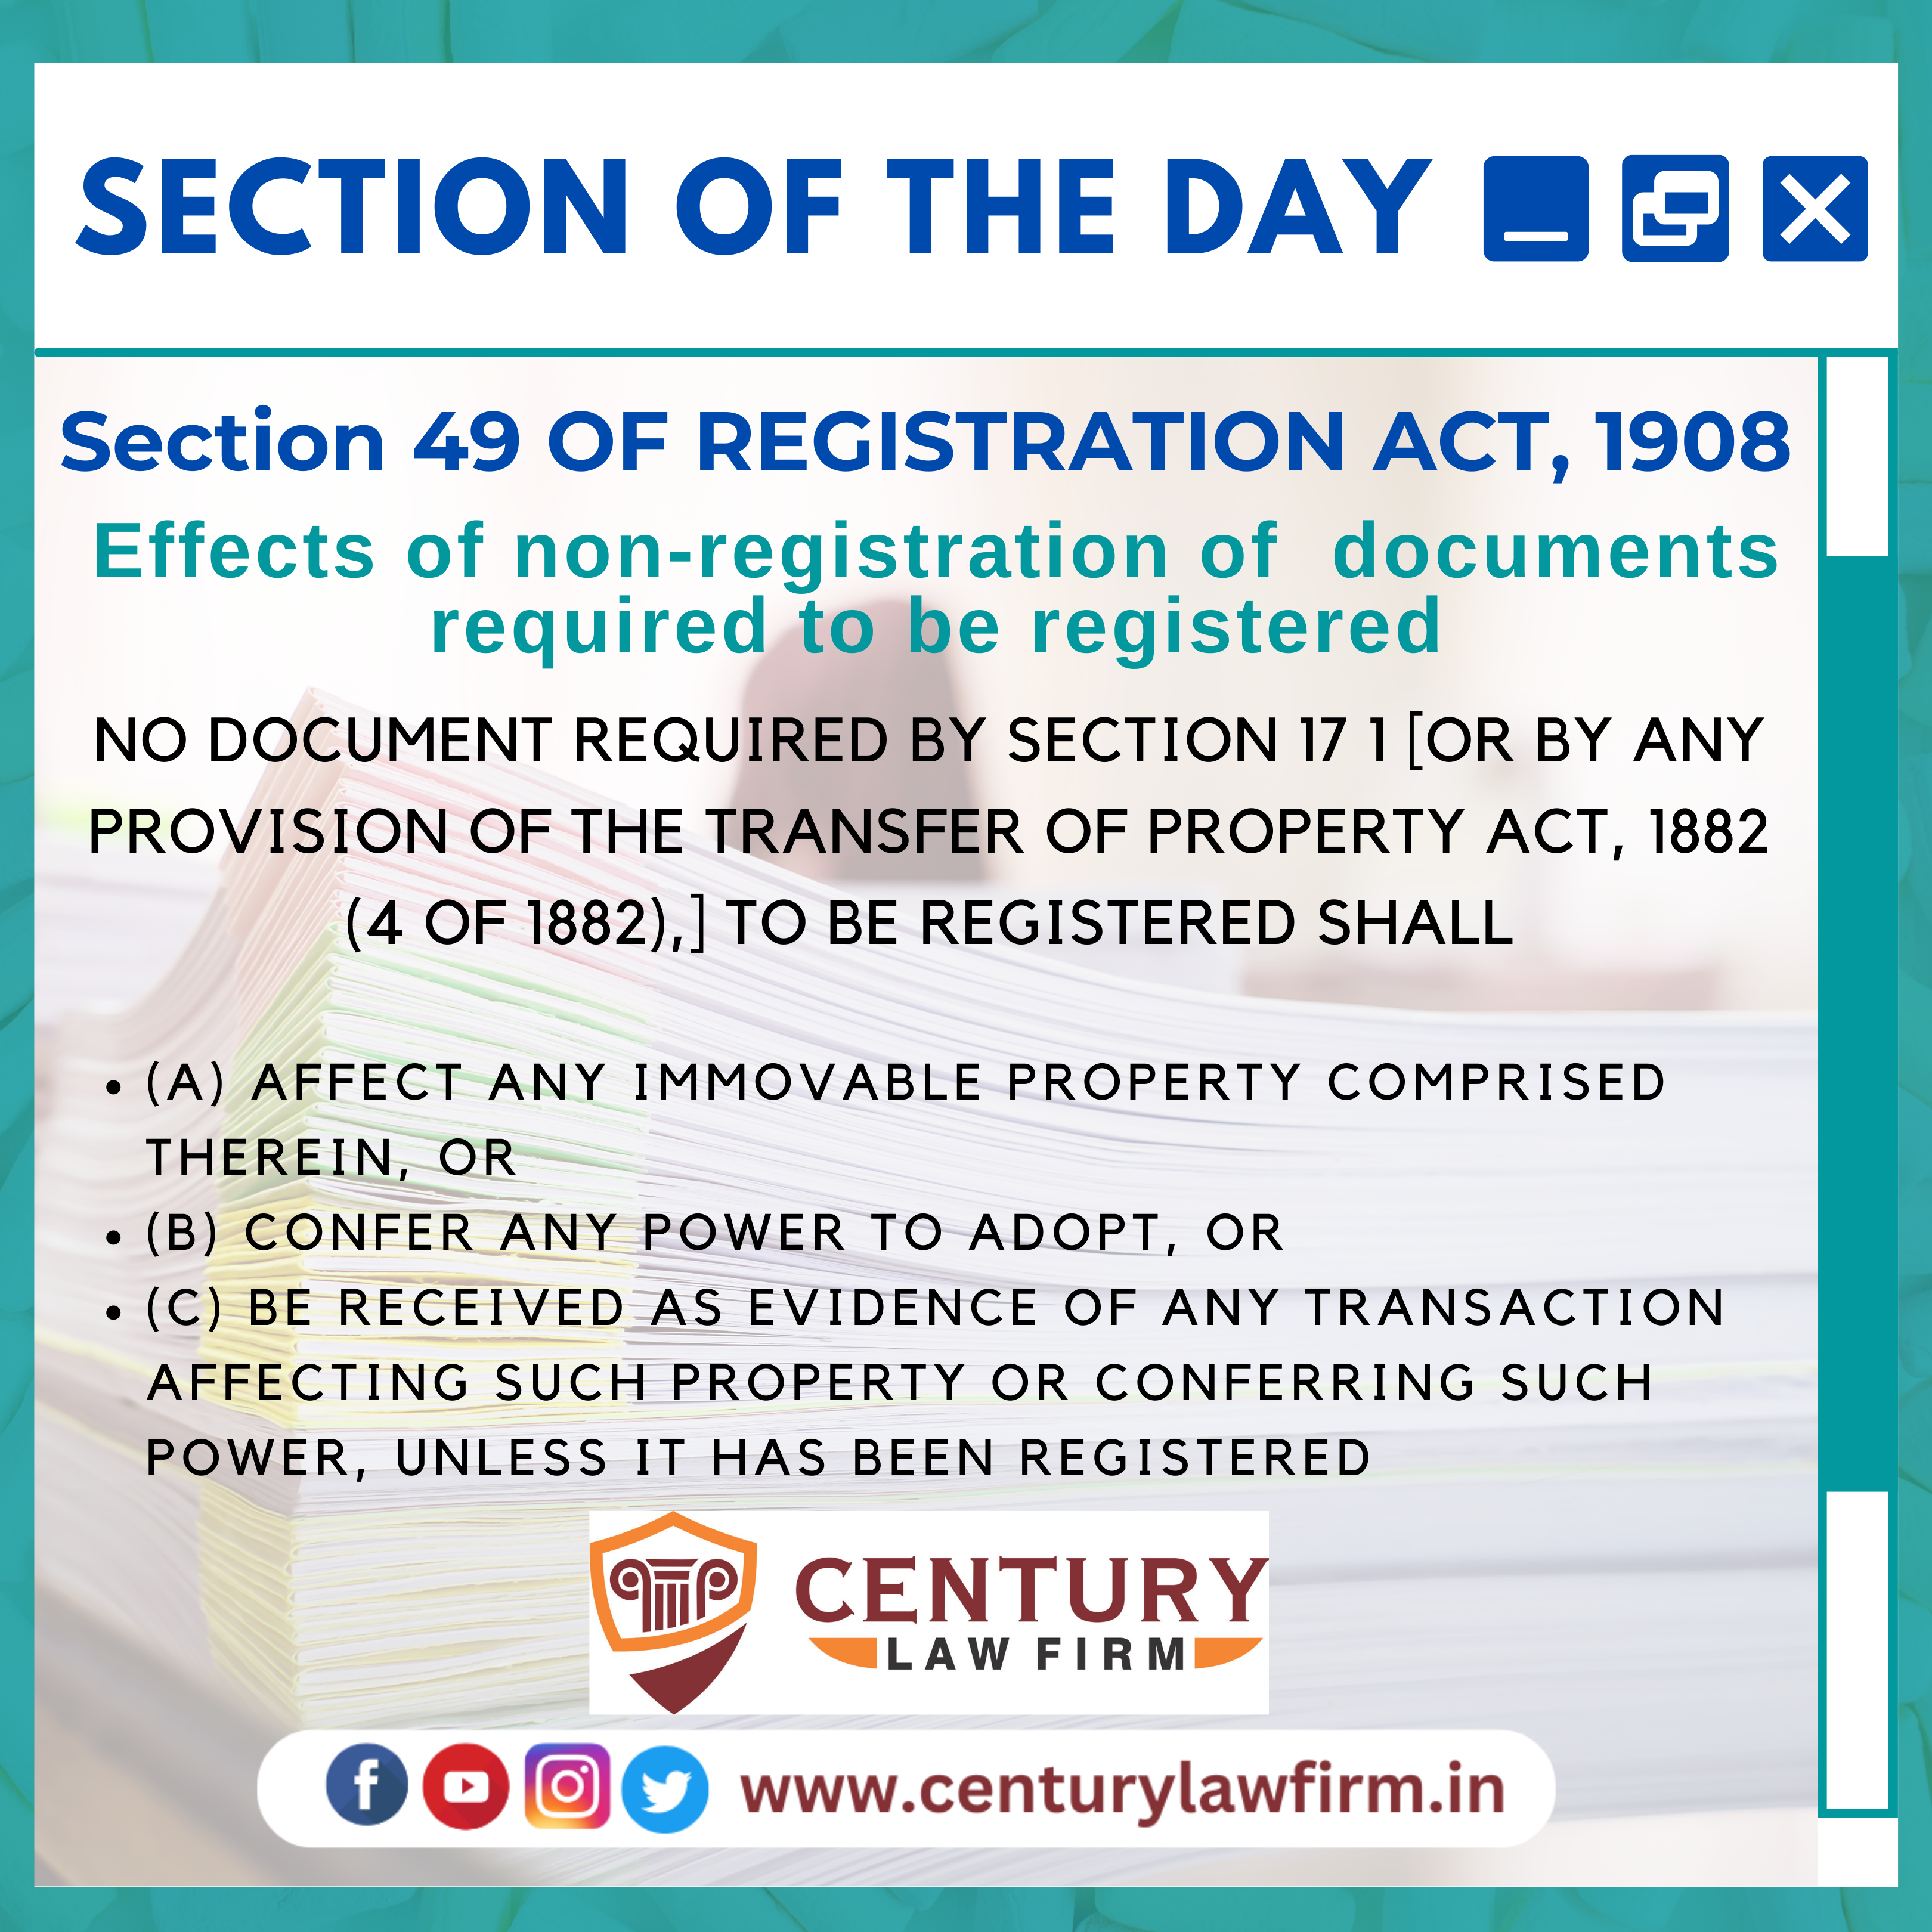 Section 49 OF REGISTRATION ACT, 1908 - Effects of Non-Registration of Documents Required to be Registered